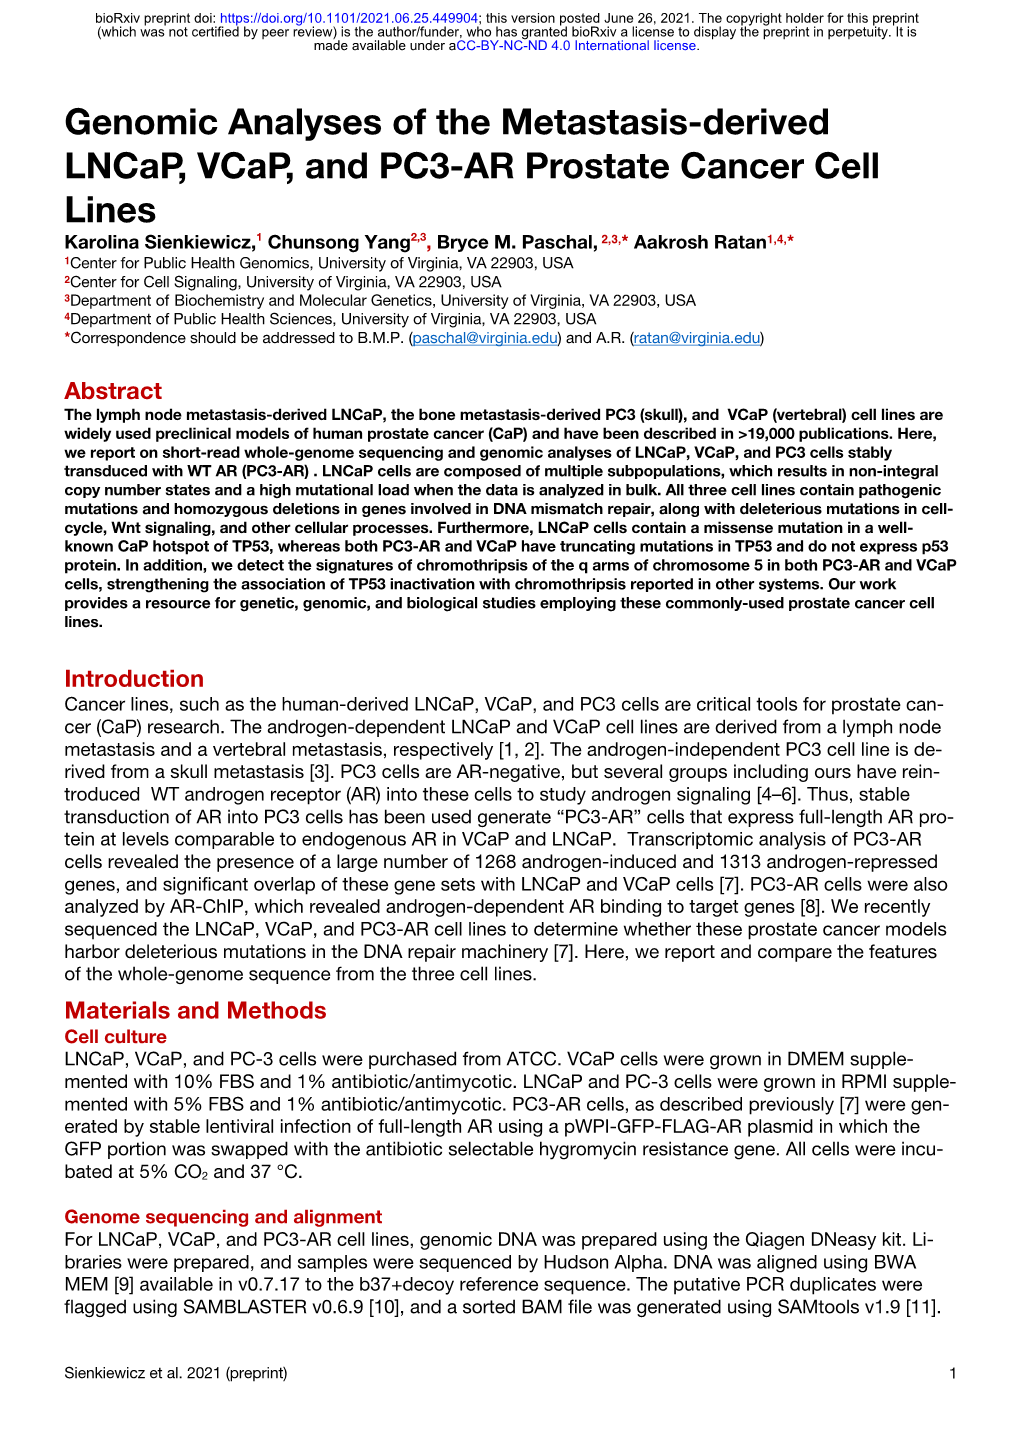 Genomic Analyses of the Metastasis-Derived Lncap, Vcap, and PC3-AR Prostate Cancer Cell Lines Karolina Sienkiewicz,1 Chunsong Yang2,3, Bryce M